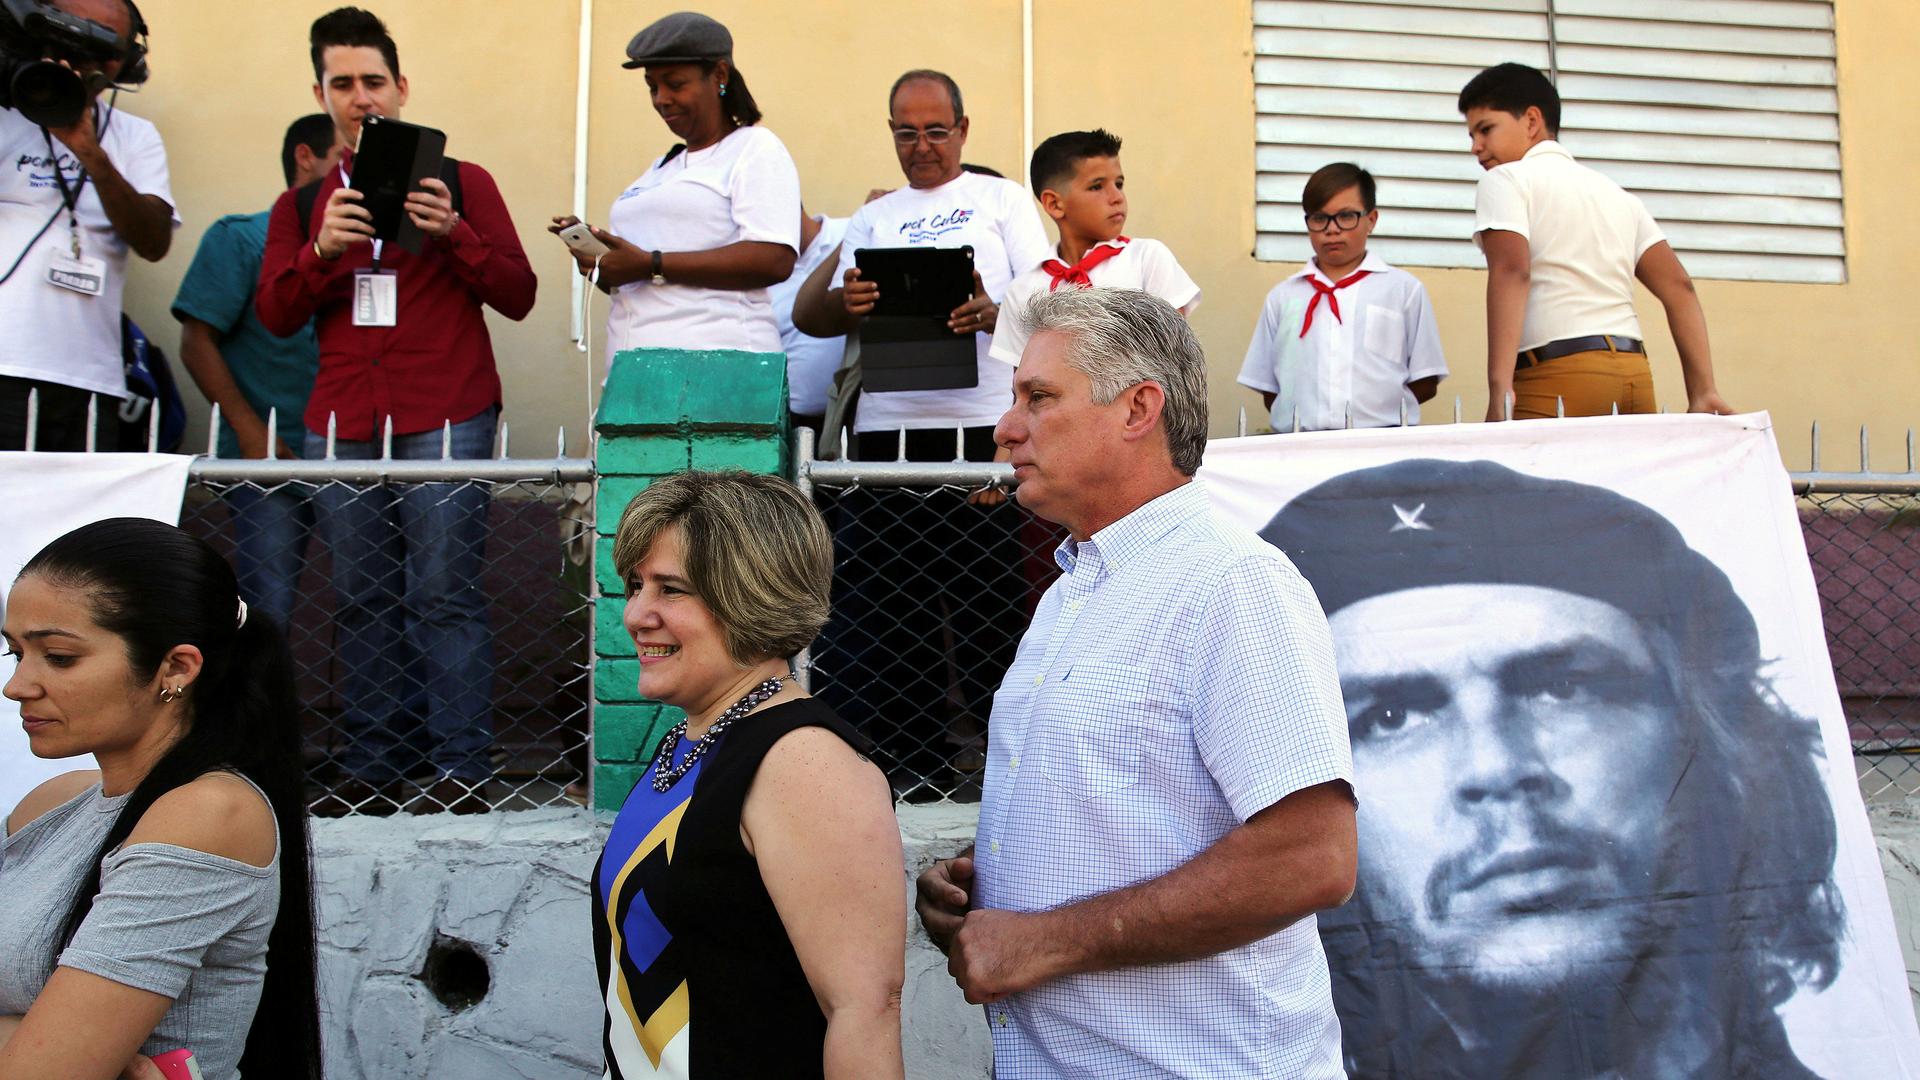 Cuba's First Vice-President Miguel Diaz-Canel and his wife Lis Cuesta stand in line before Diaz-Canel casts his vote during an election of candidates for the national and provincial assemblies.